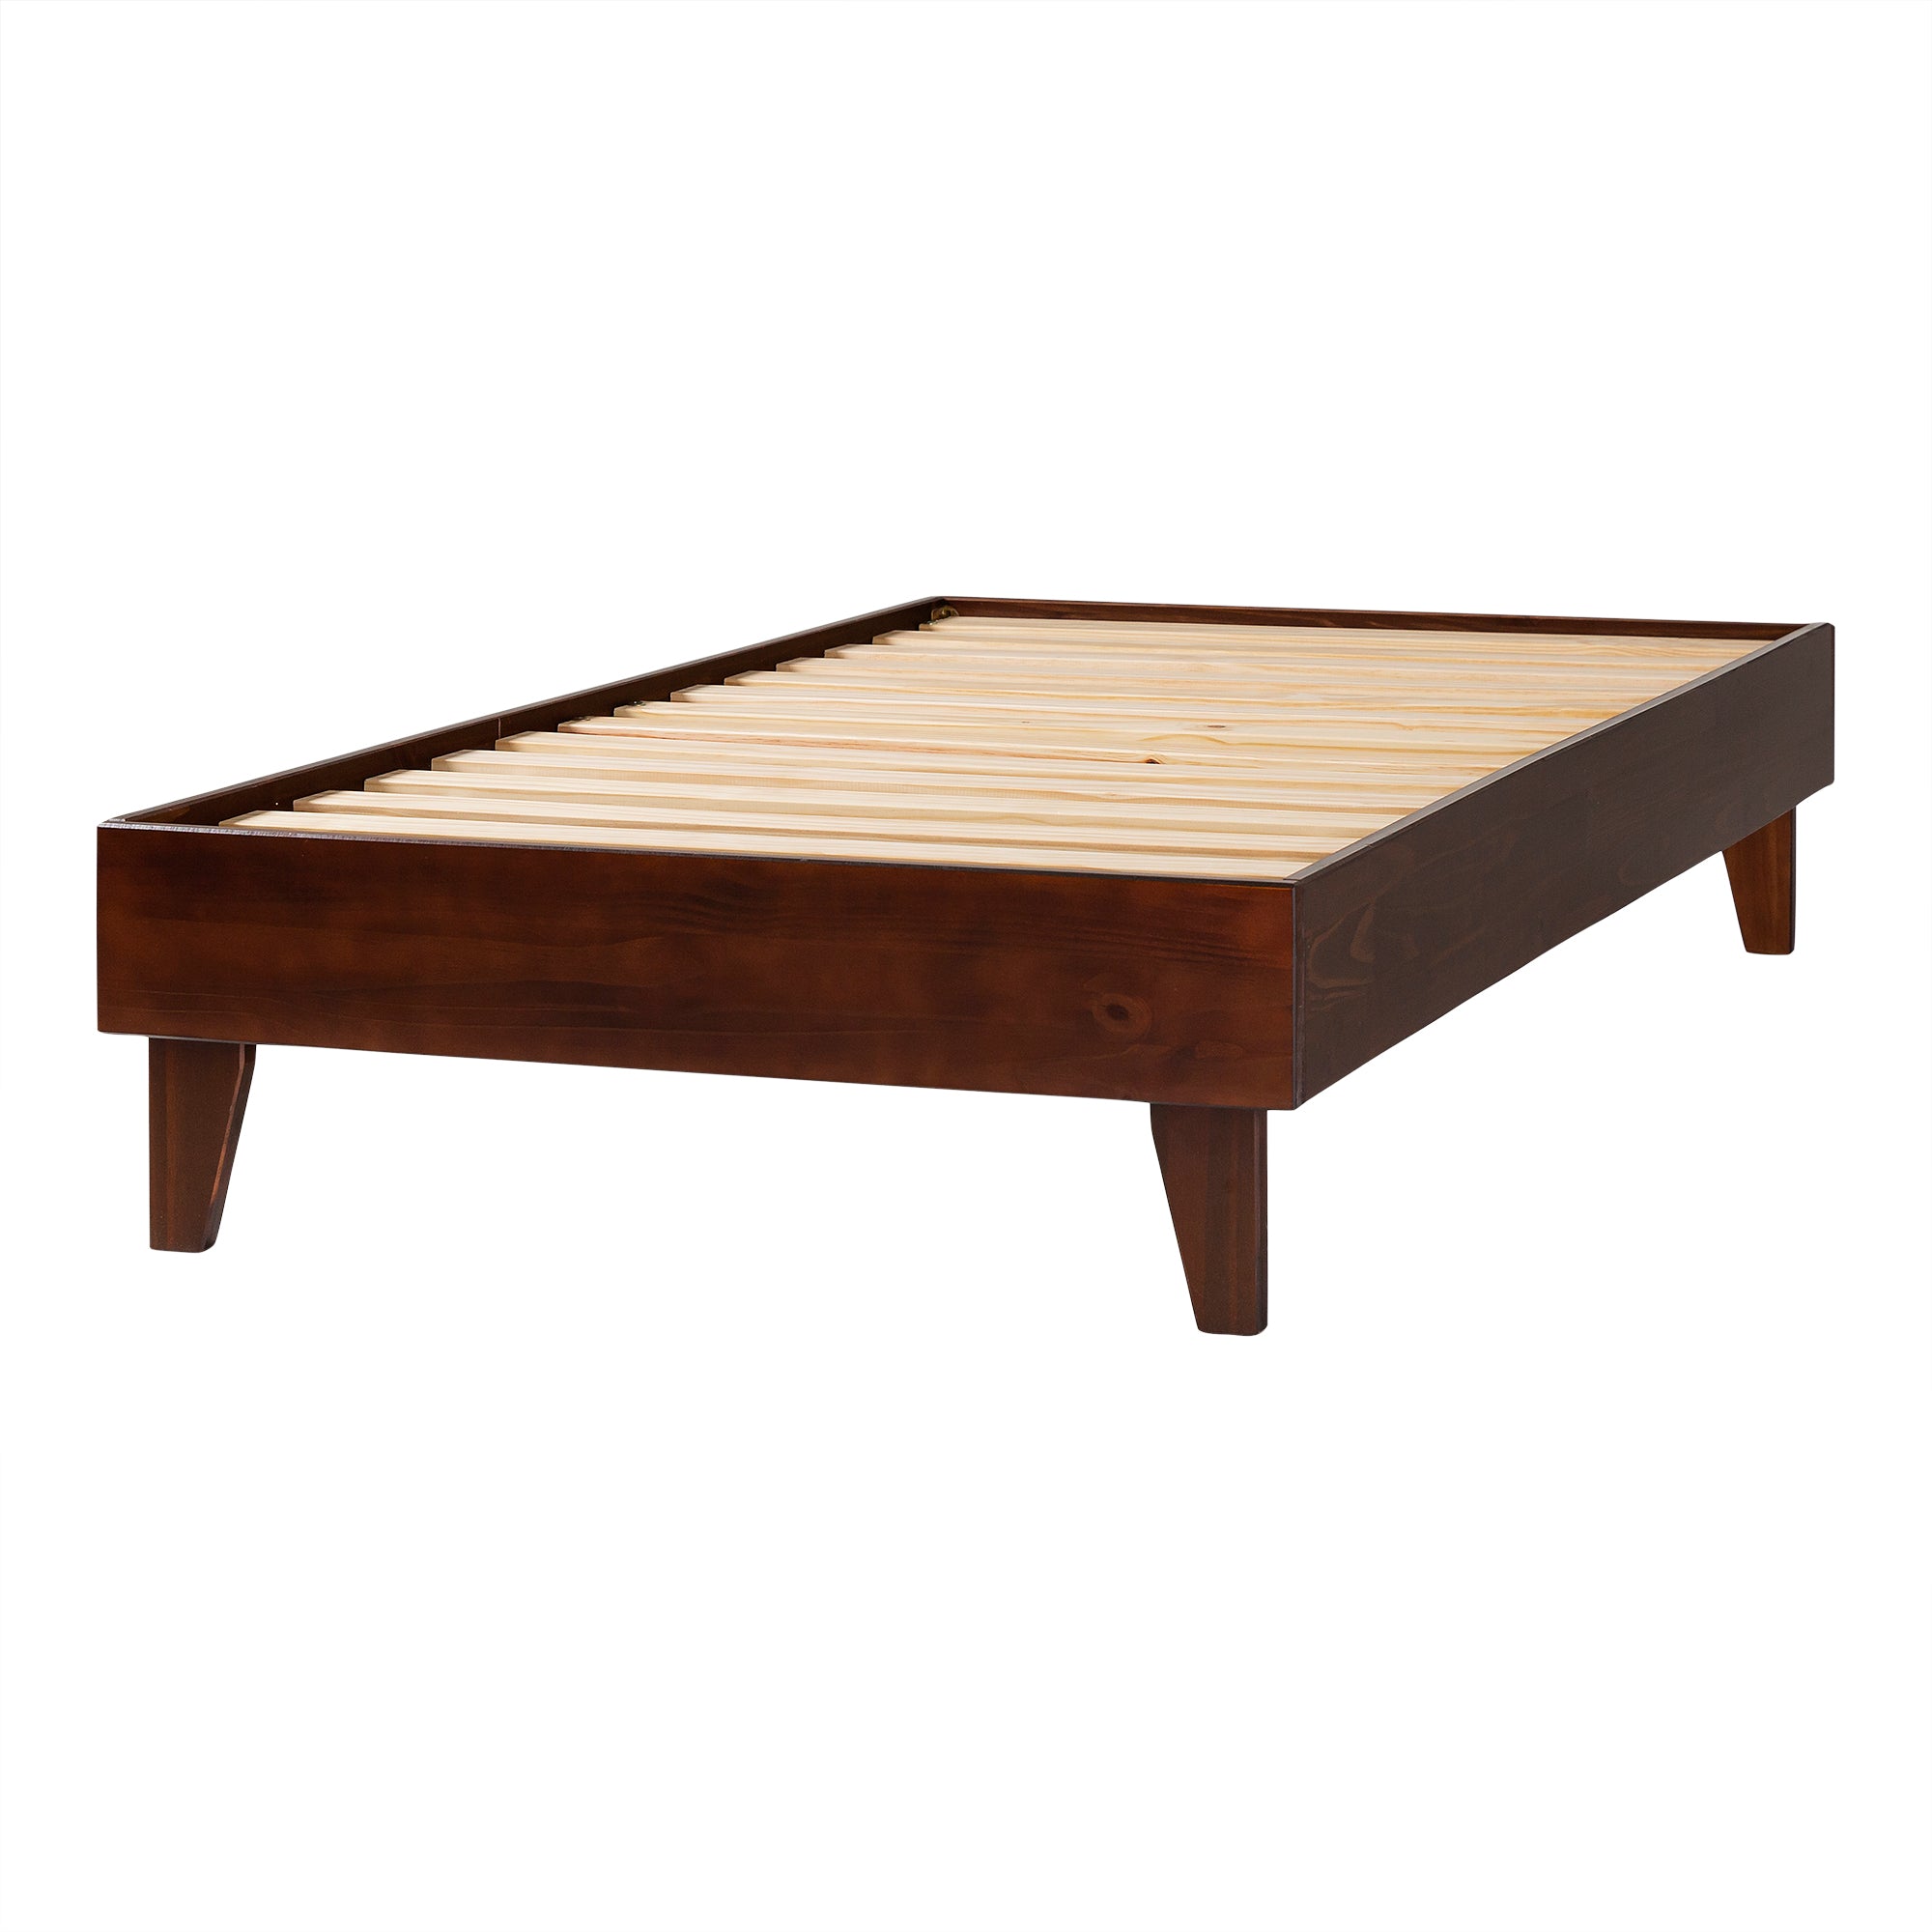 Solid Wood Twin Platform Bed - East Shore Modern Home Furnishings